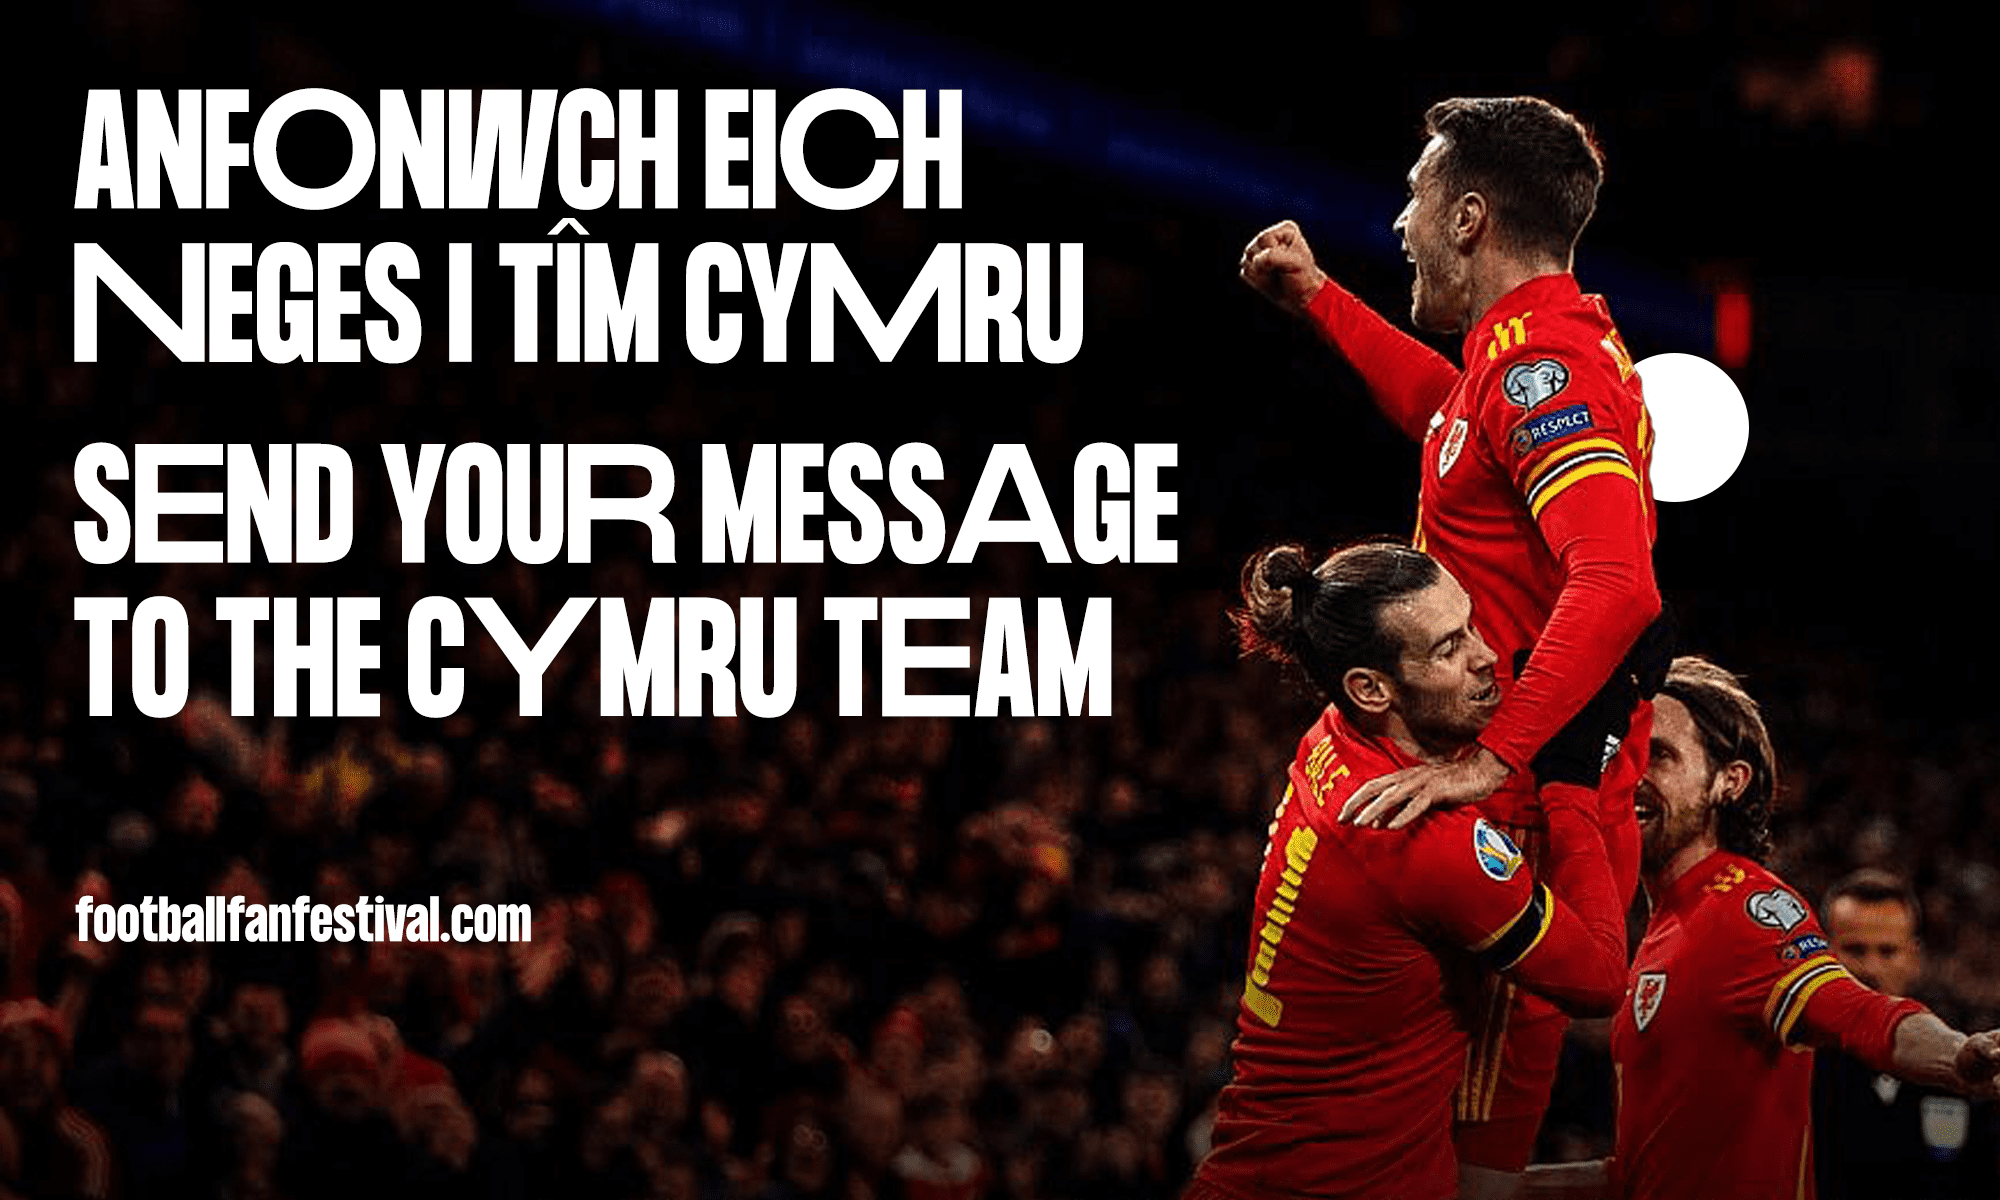 Send your message to the Cymru Team!